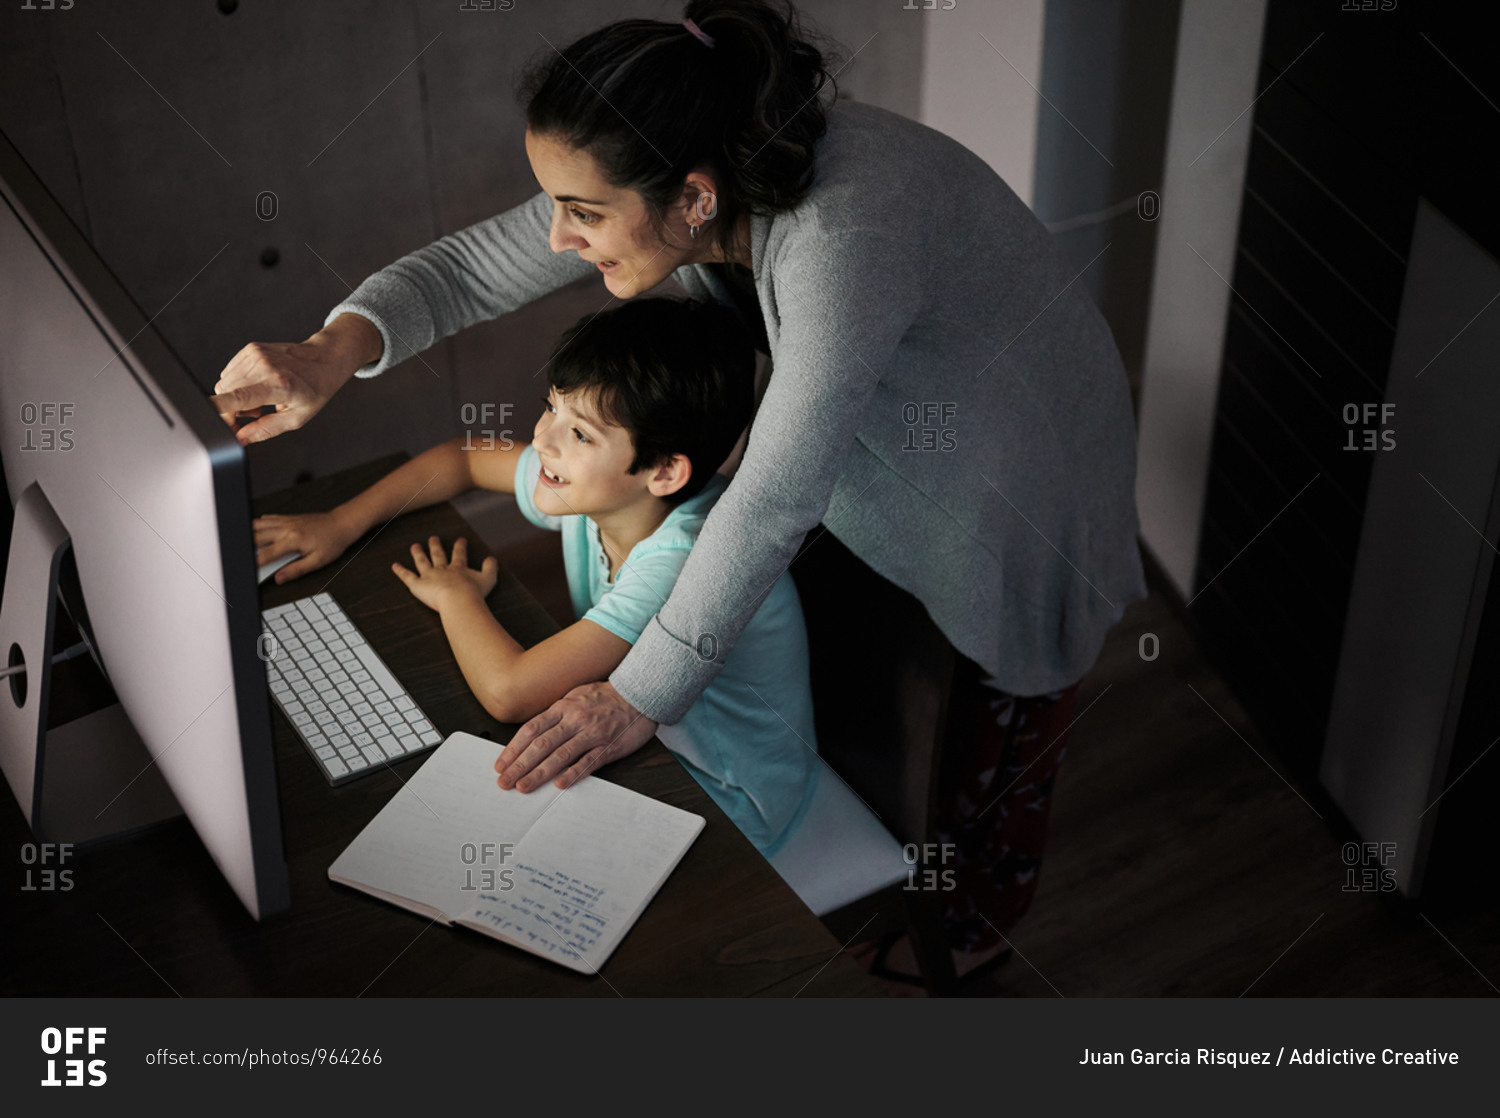 Side view of young woman explaining study task to positive son sitting at table with computer and textbook during online lesson at home